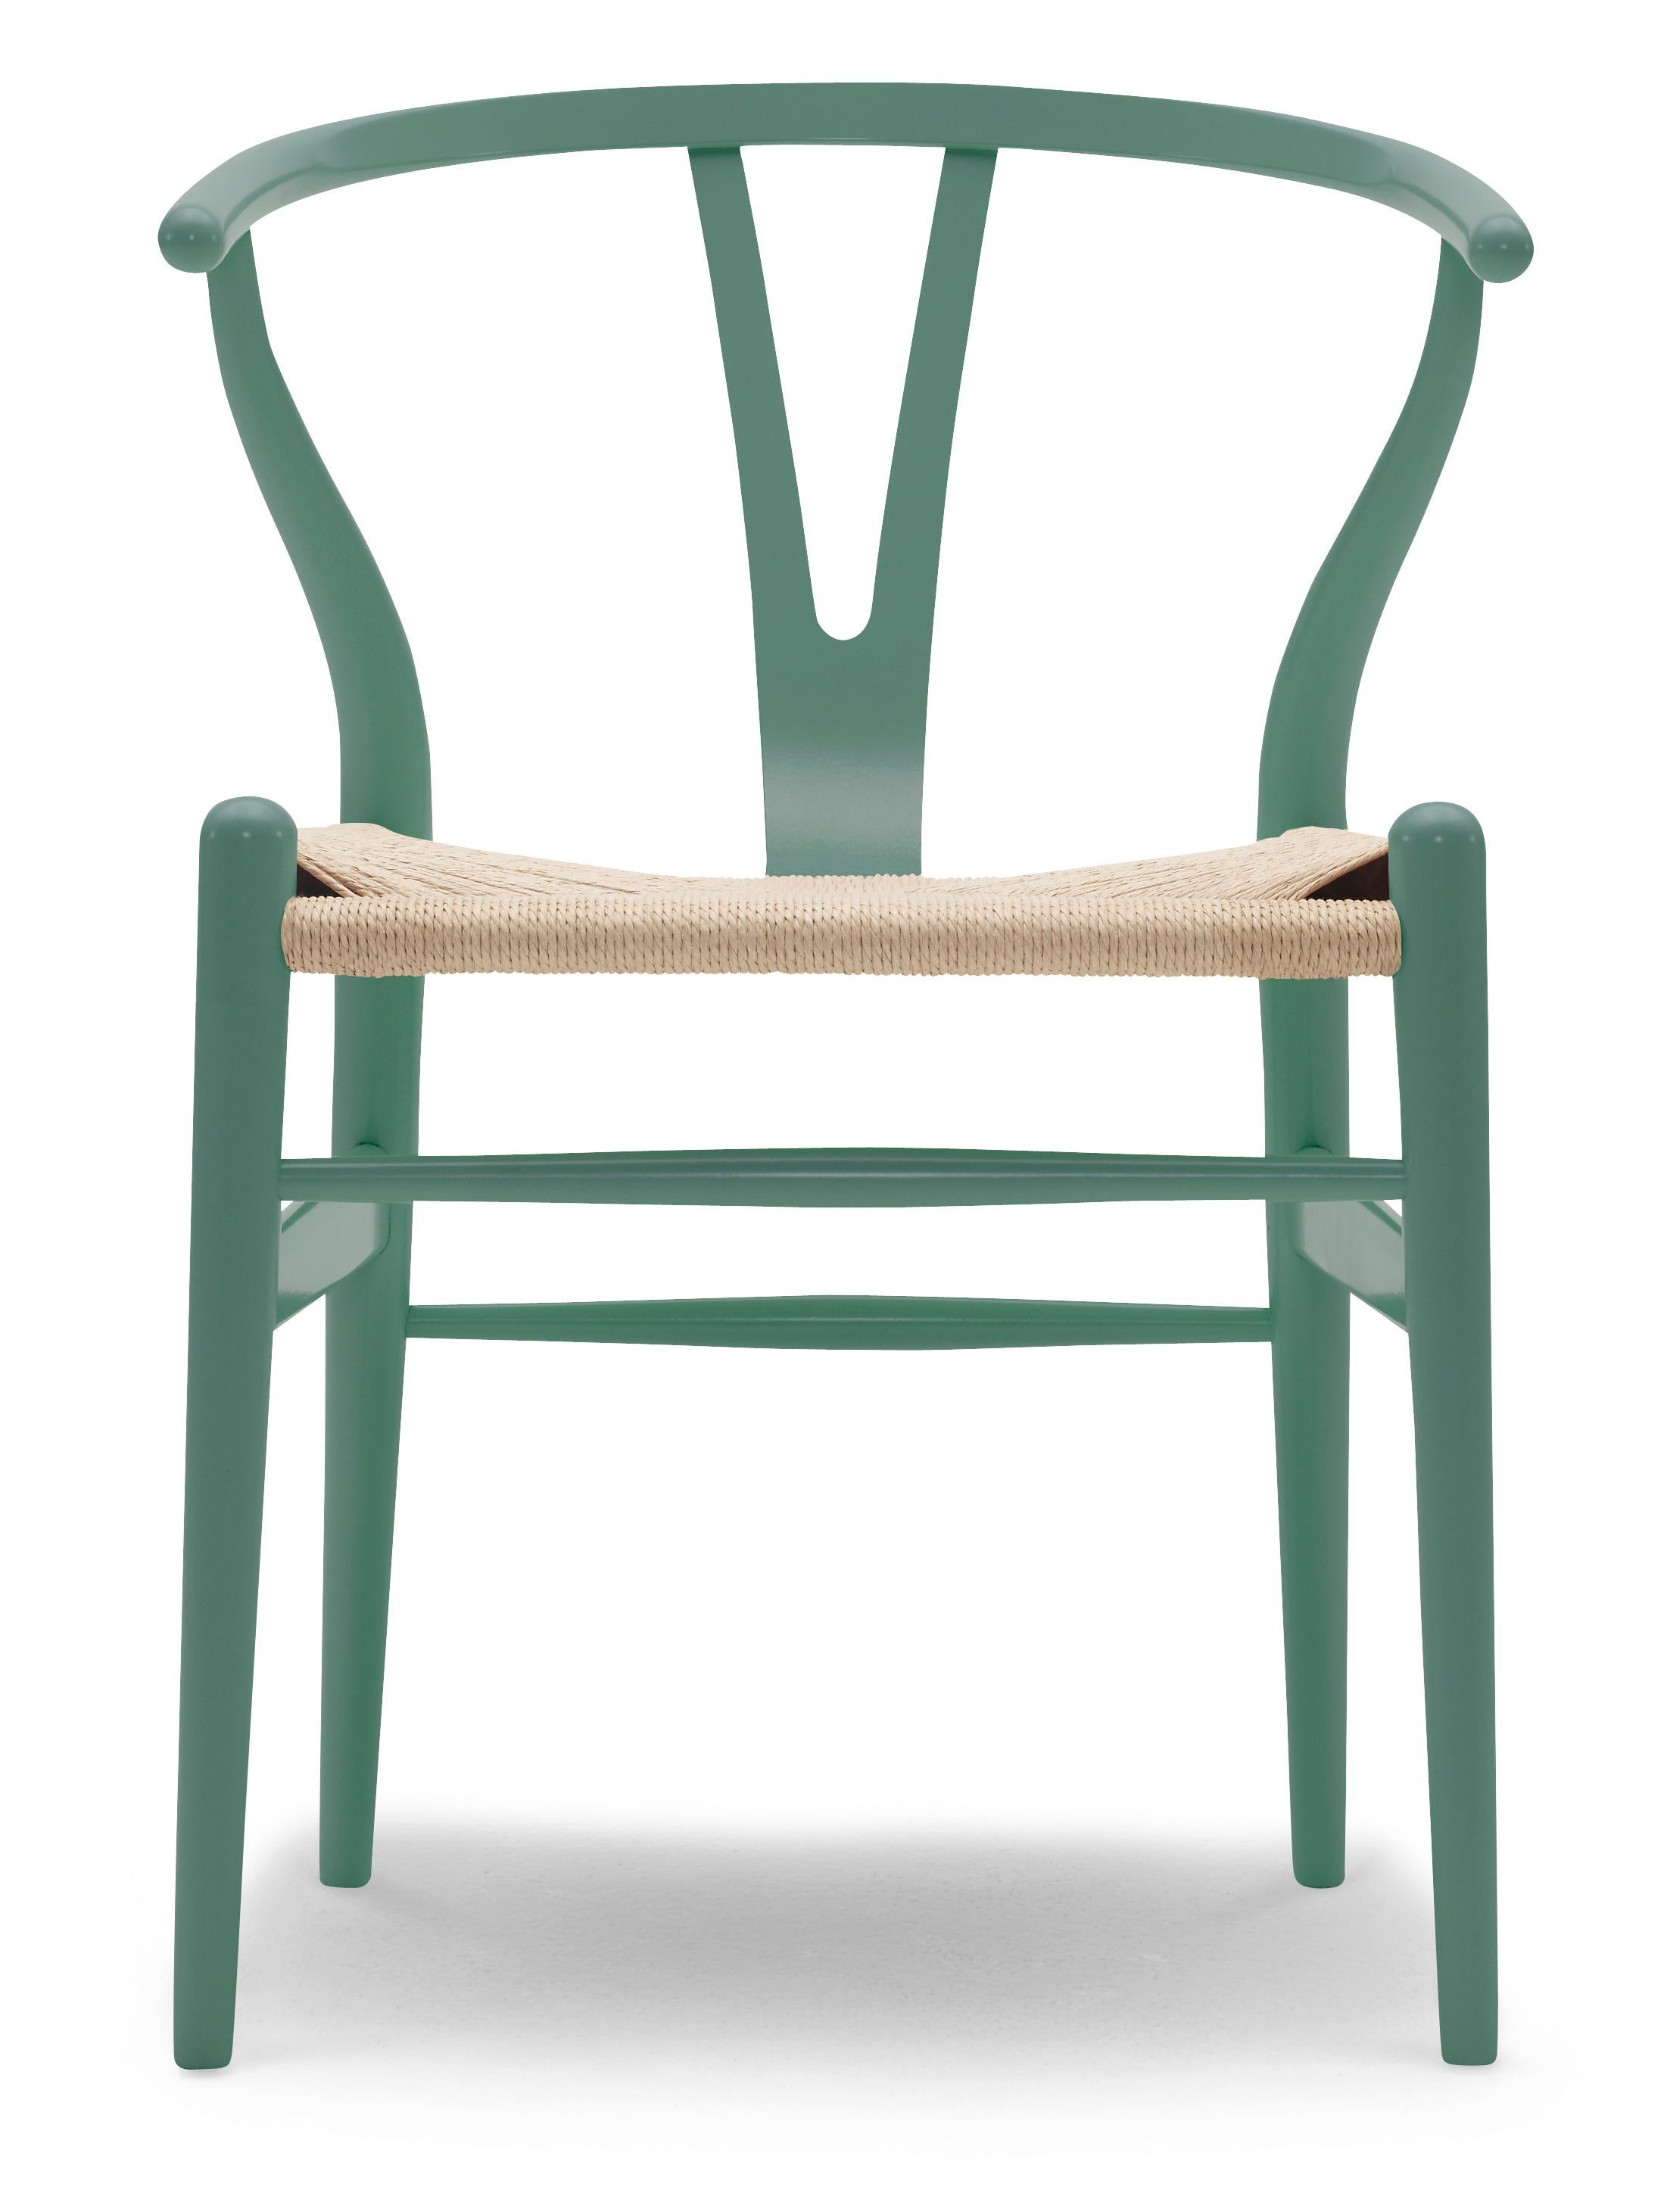 Green (NCS S6020-B50G) CH24 Wishbone Chair in Color Finishes with Natural Papercord Seat by Hans Wegner